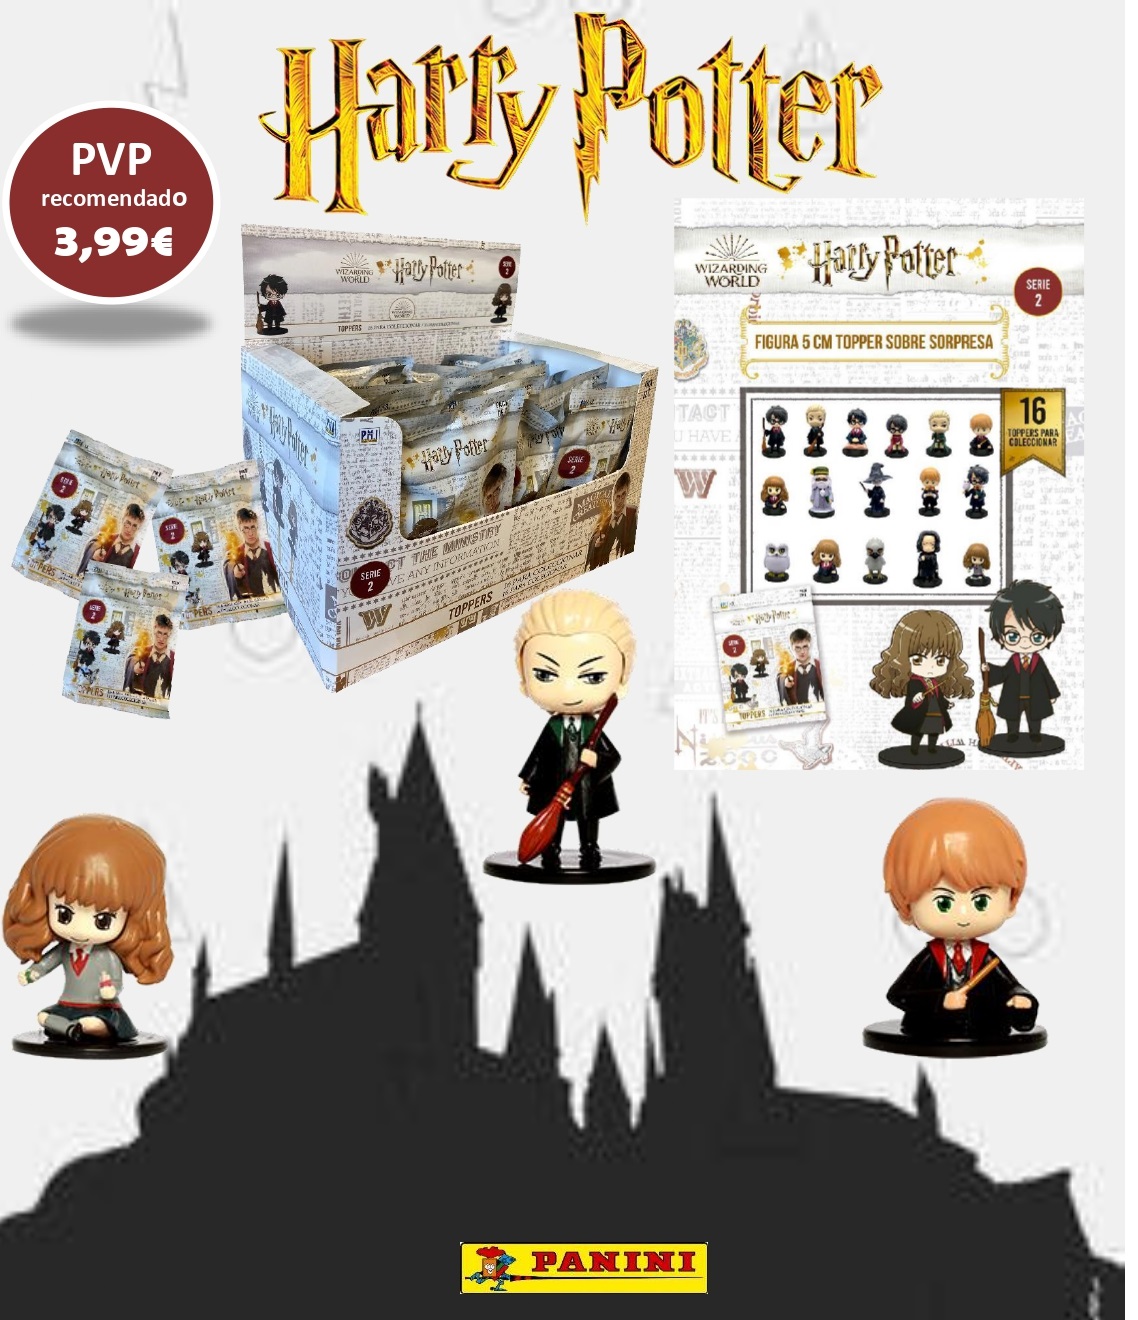 PANINI HARRY POTTER TOPPERS: Productos de Sarigabo, S. L. }}